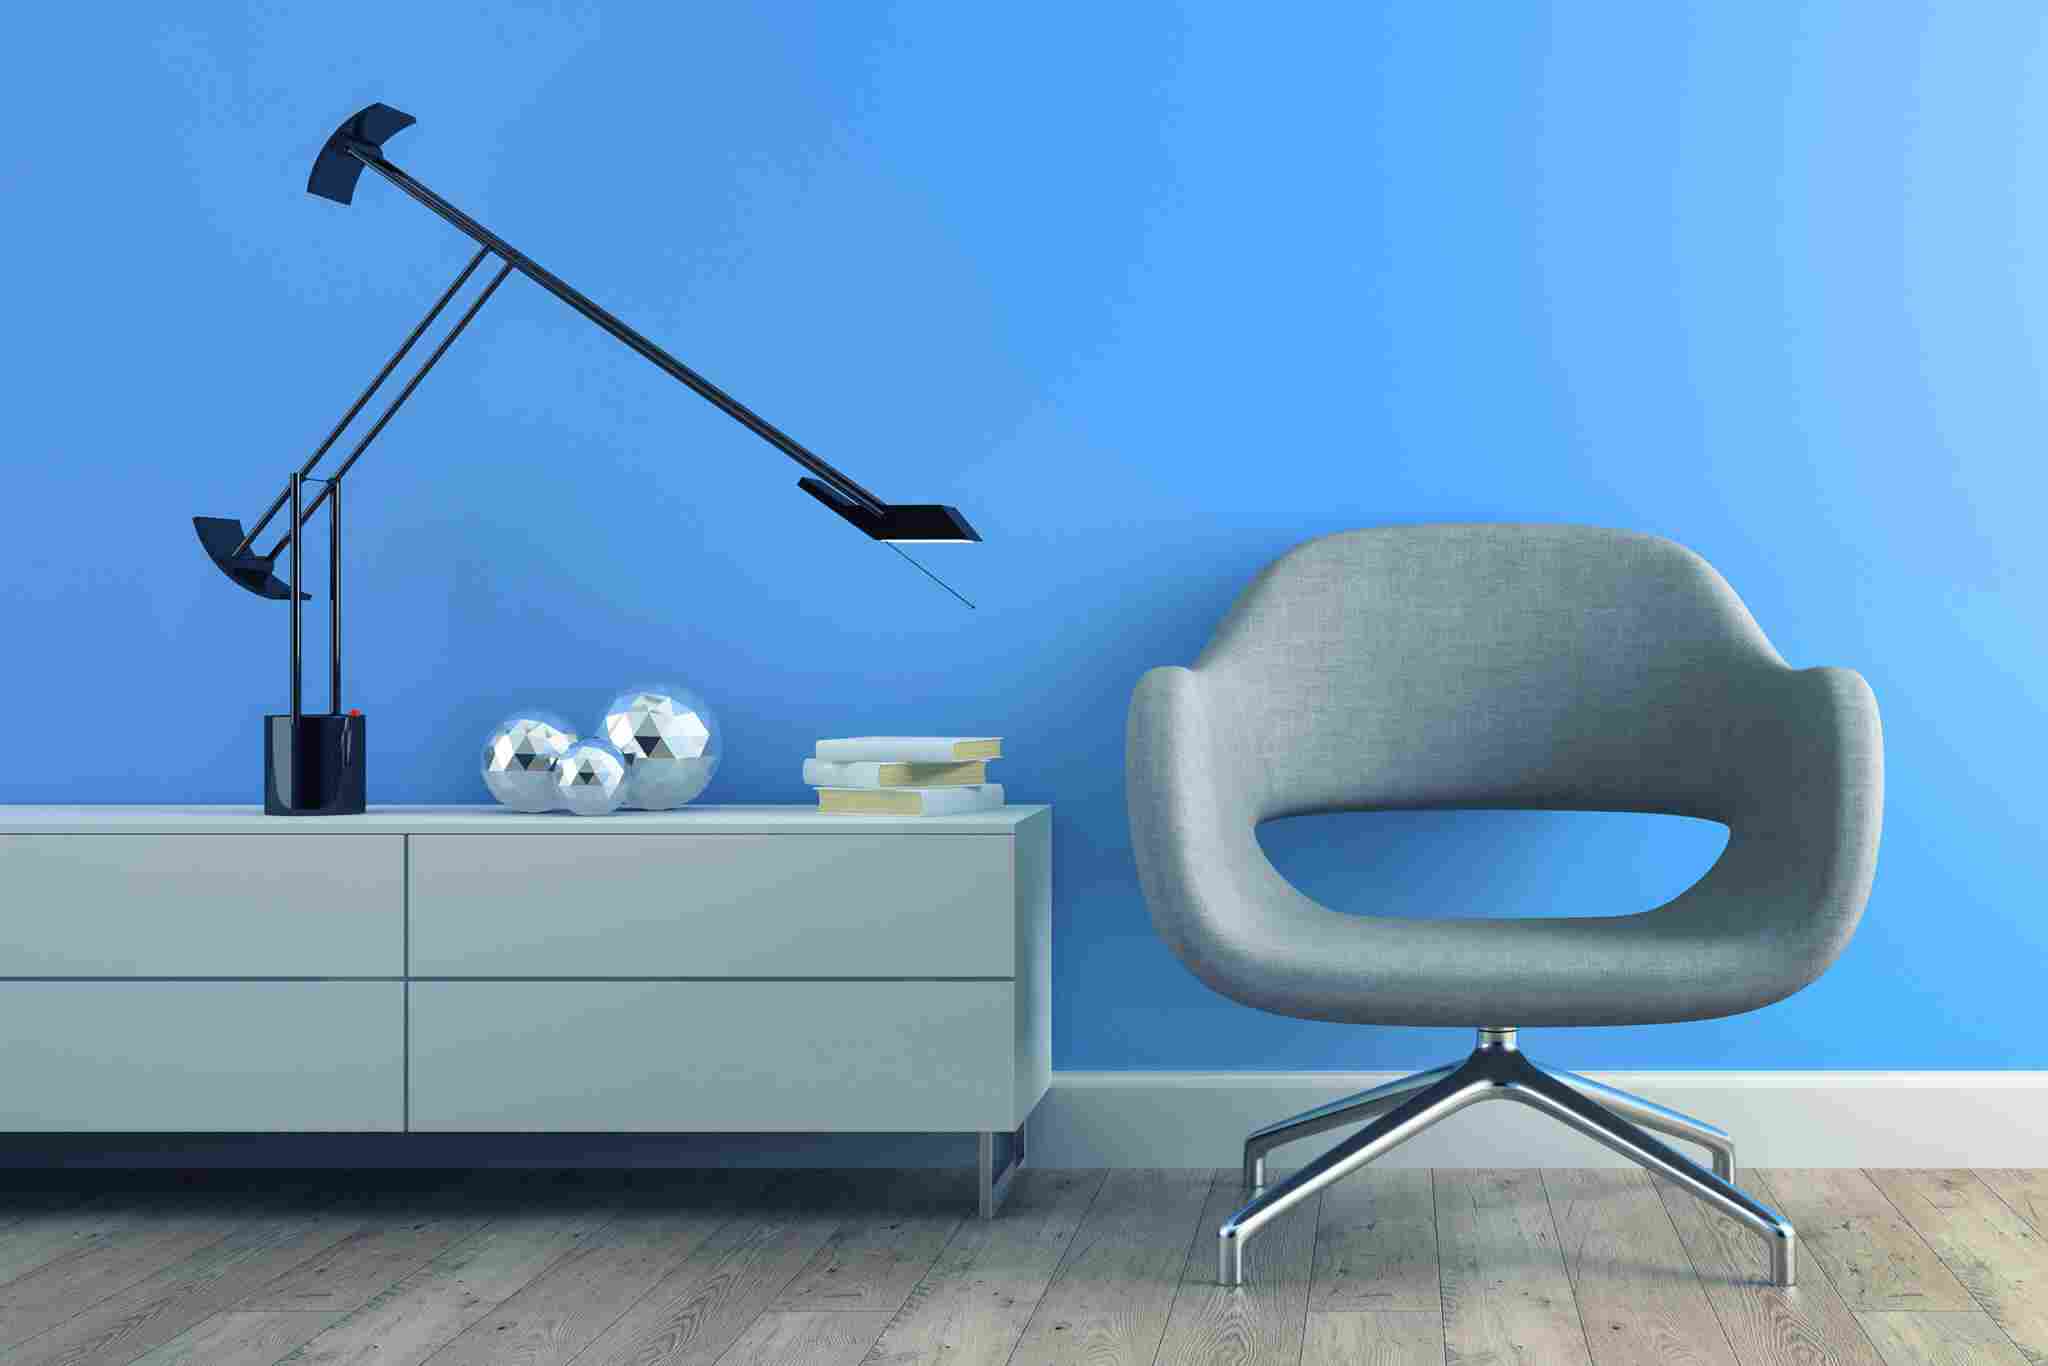 https://www.pocketworth.in/wp-content/uploads/2017/05/image-chair-blue-wall.jpg